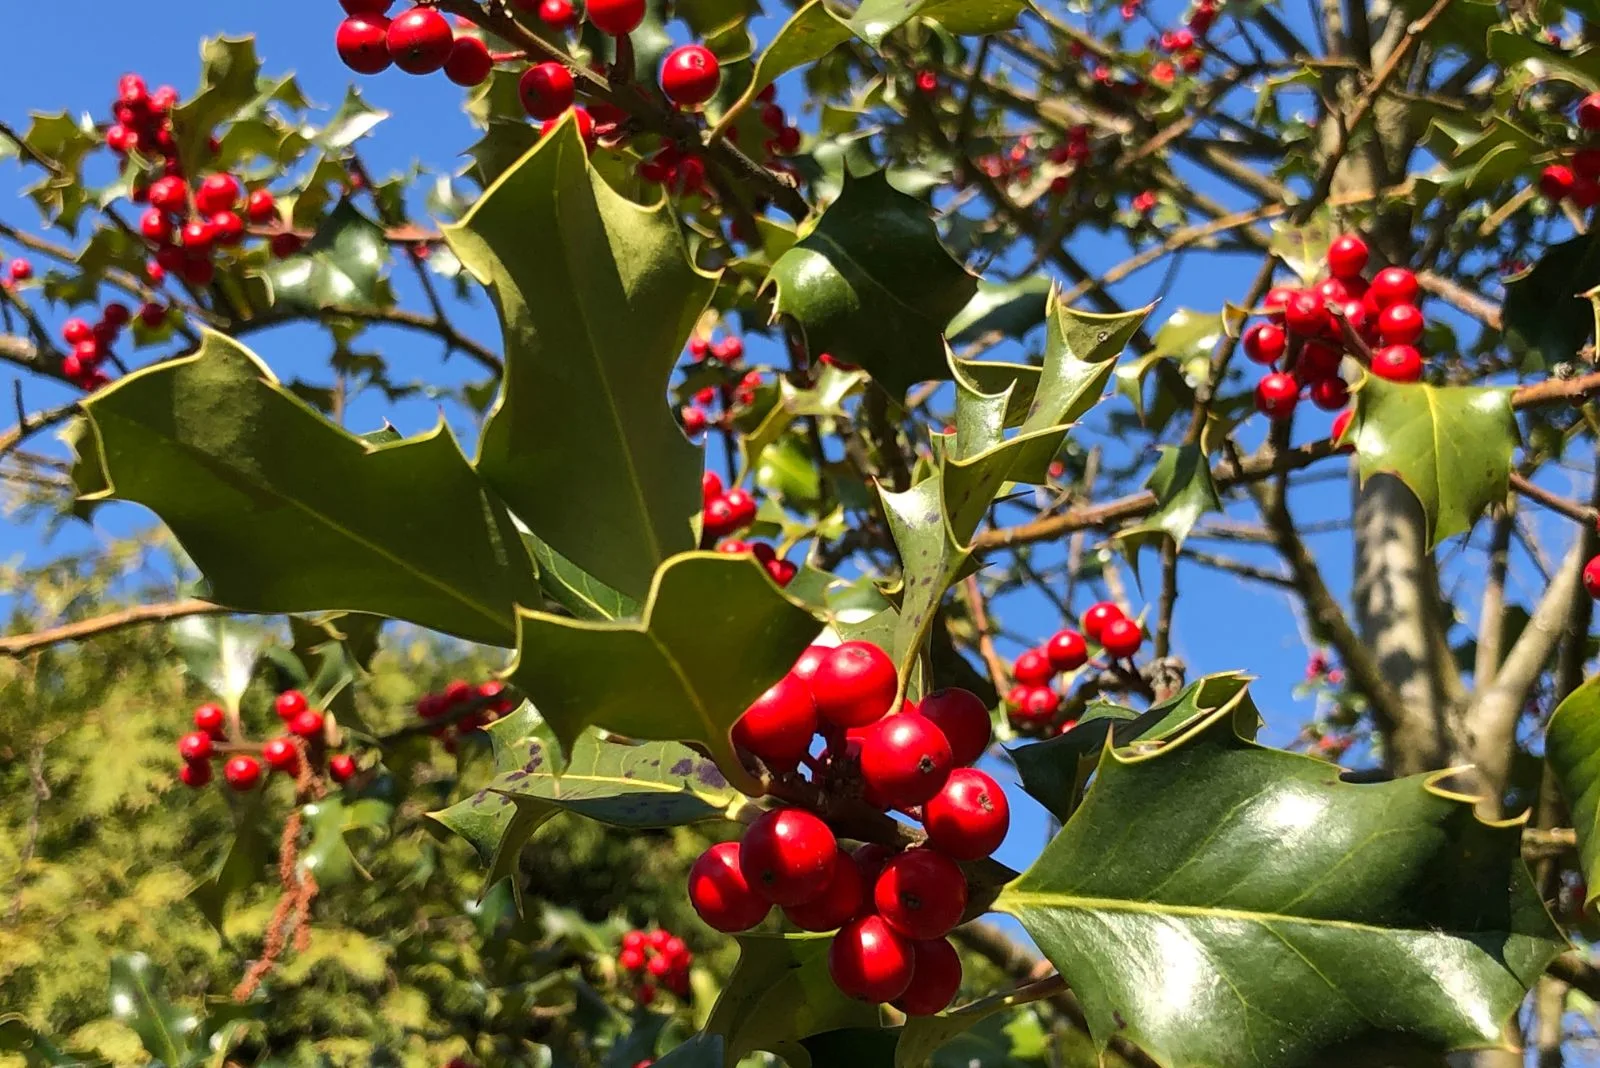 English holly with red berries